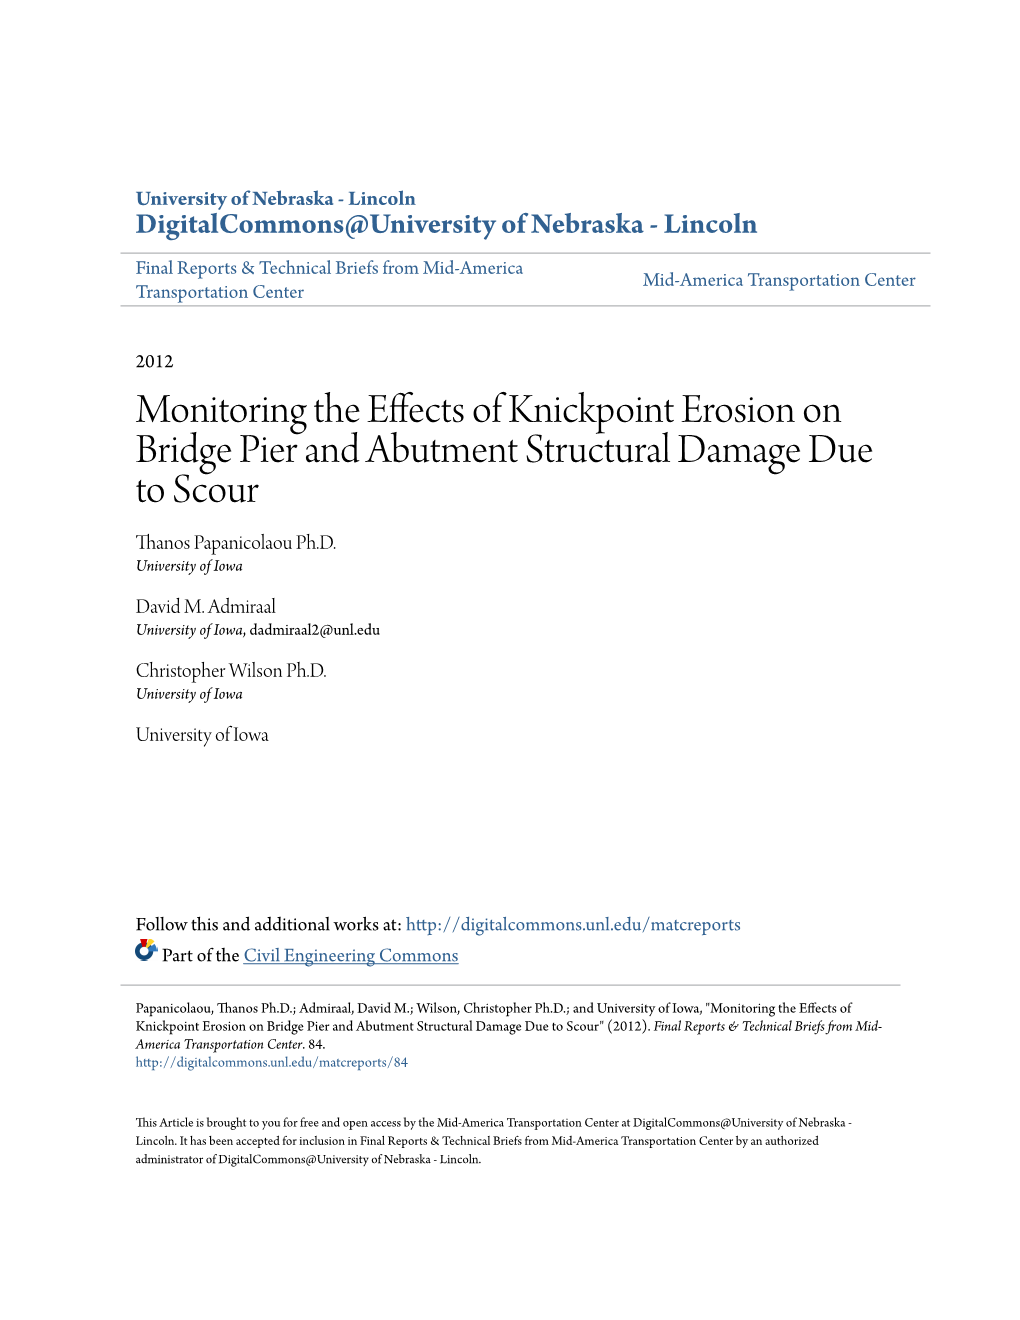 Monitoring the Effects of Knickpoint Erosion on Bridge Pier and Abutment Structural Damage Due to Scour Thanos Papanicolaou Ph.D